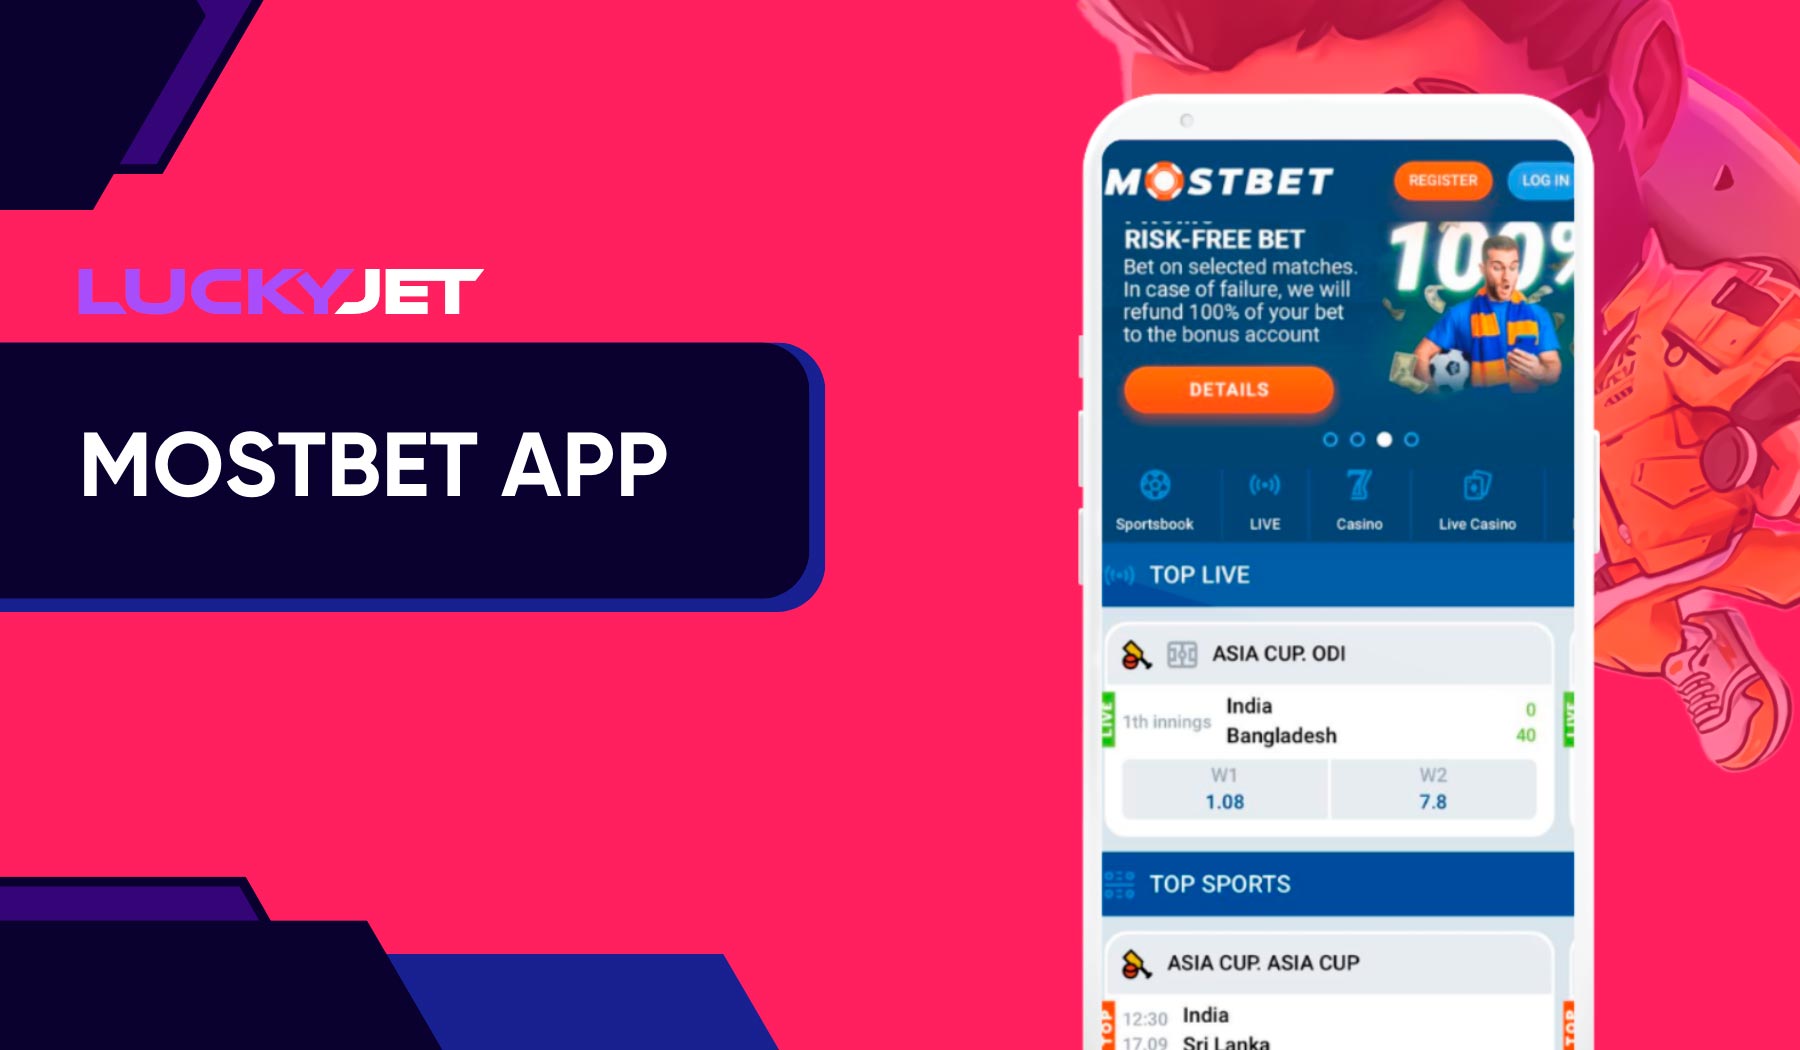 The Mostbet mobile app